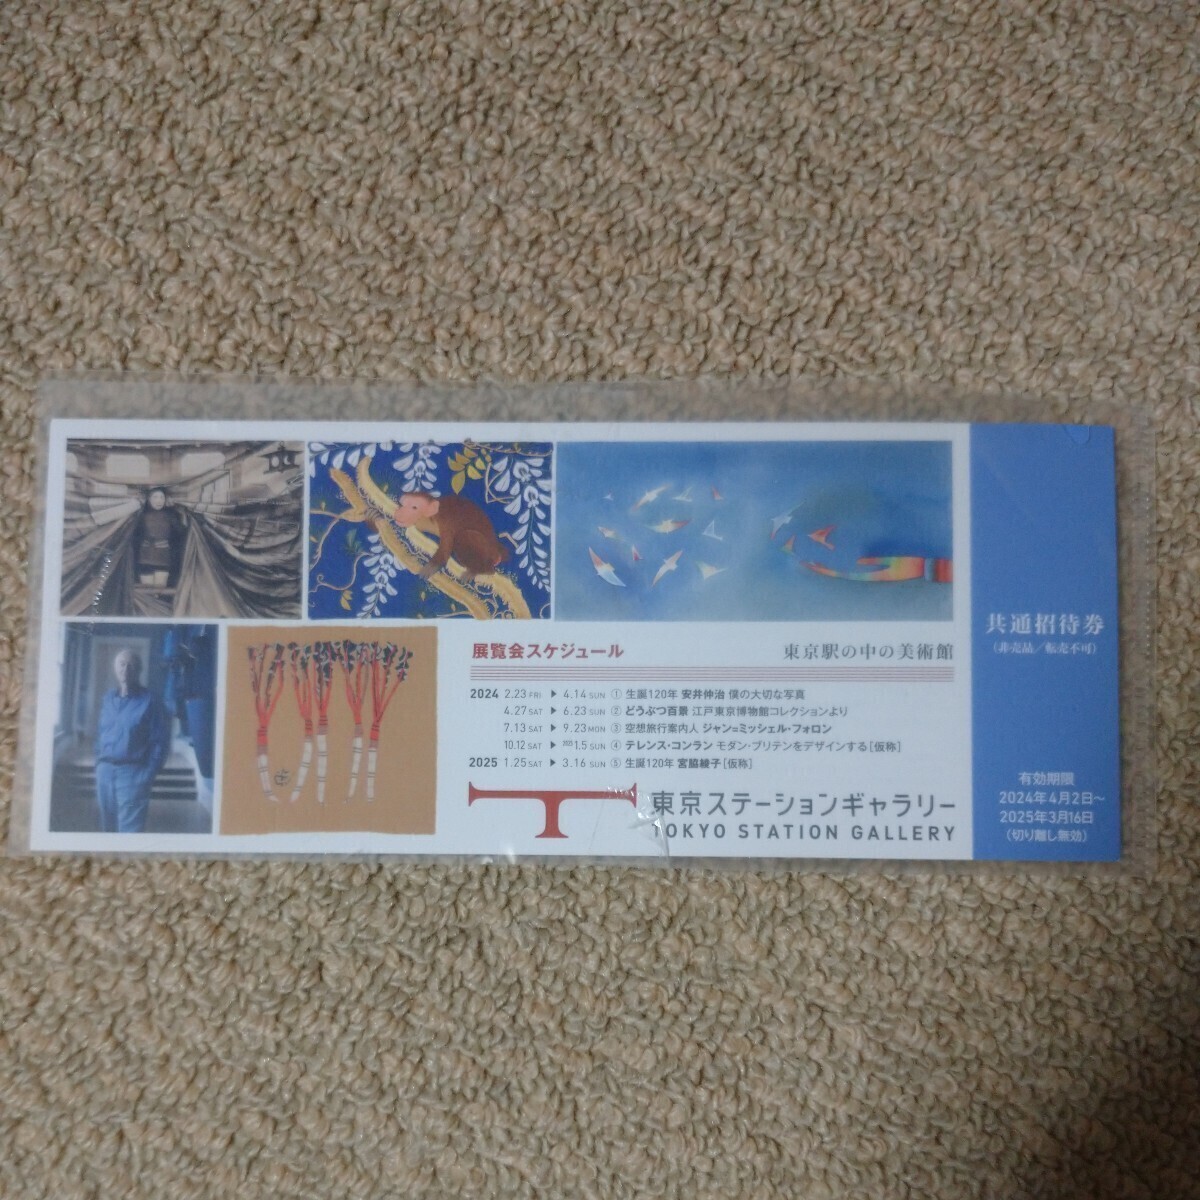 [ free shipping ] common invitation ticket 2 pieces set Tokyo station guarantee Lee 